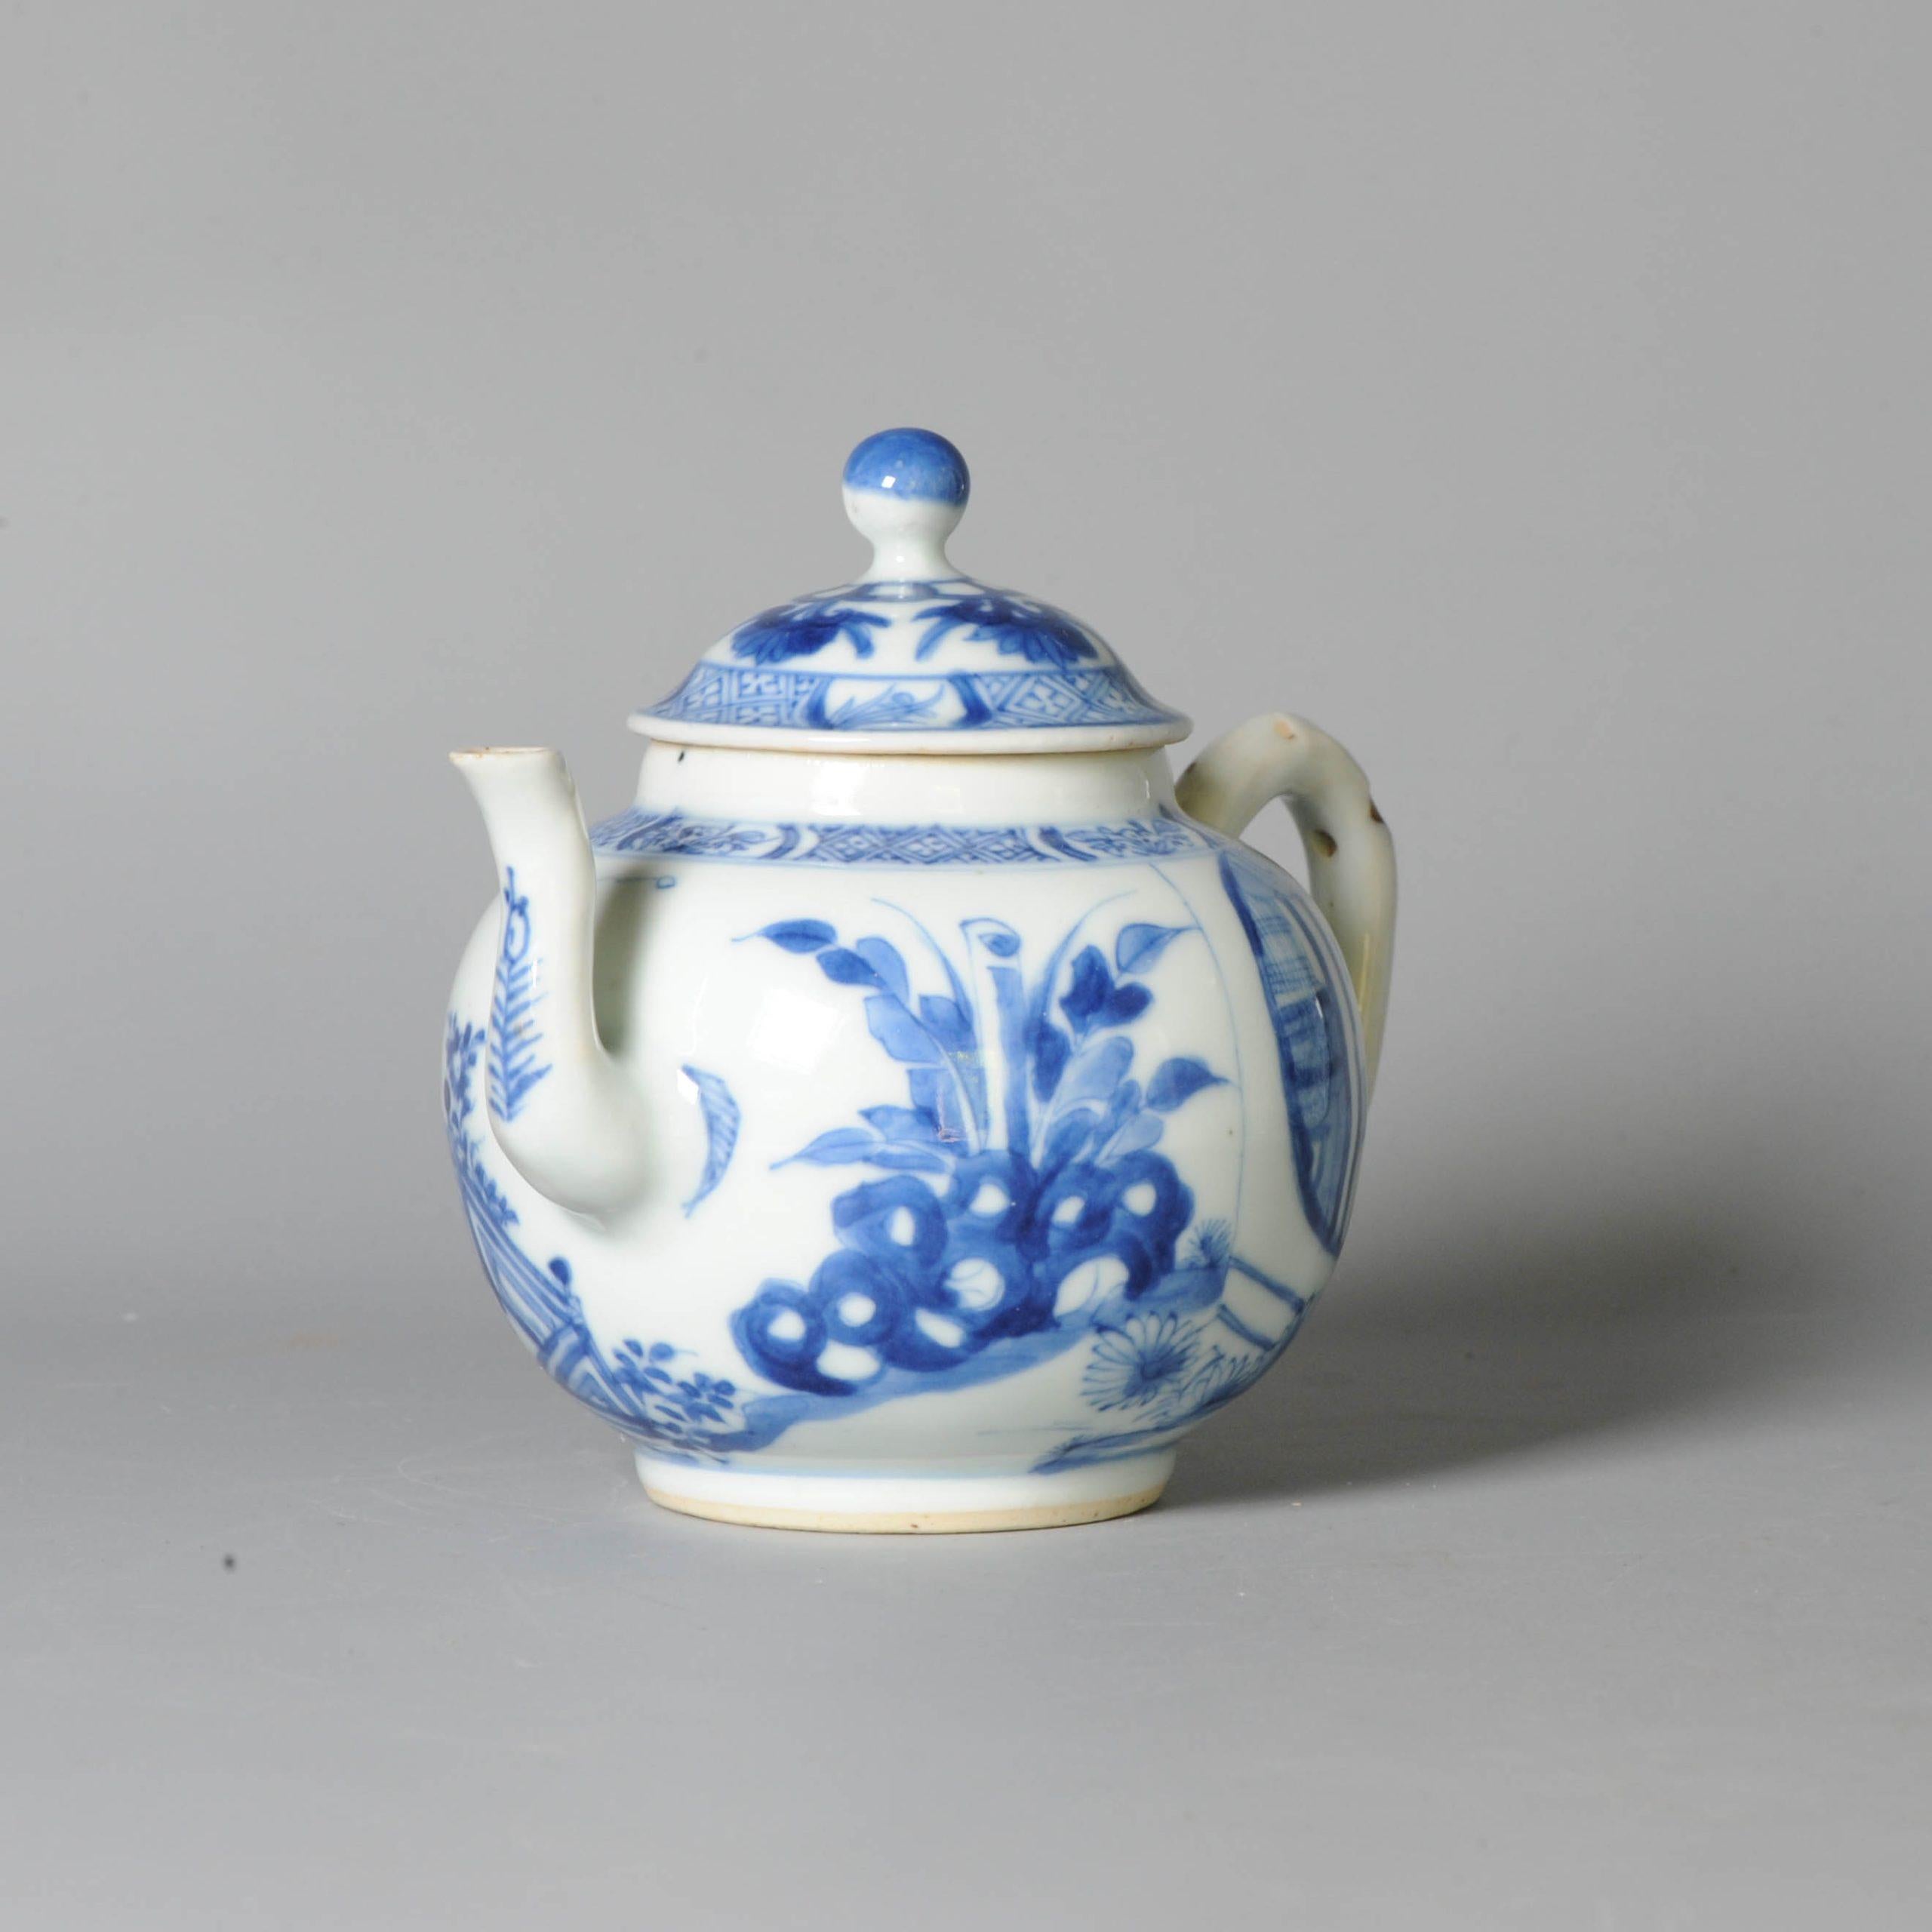 Antique Chinese Porcelain Kangxi Period Teapot Famille Noire Rose Flowers For Sale 1